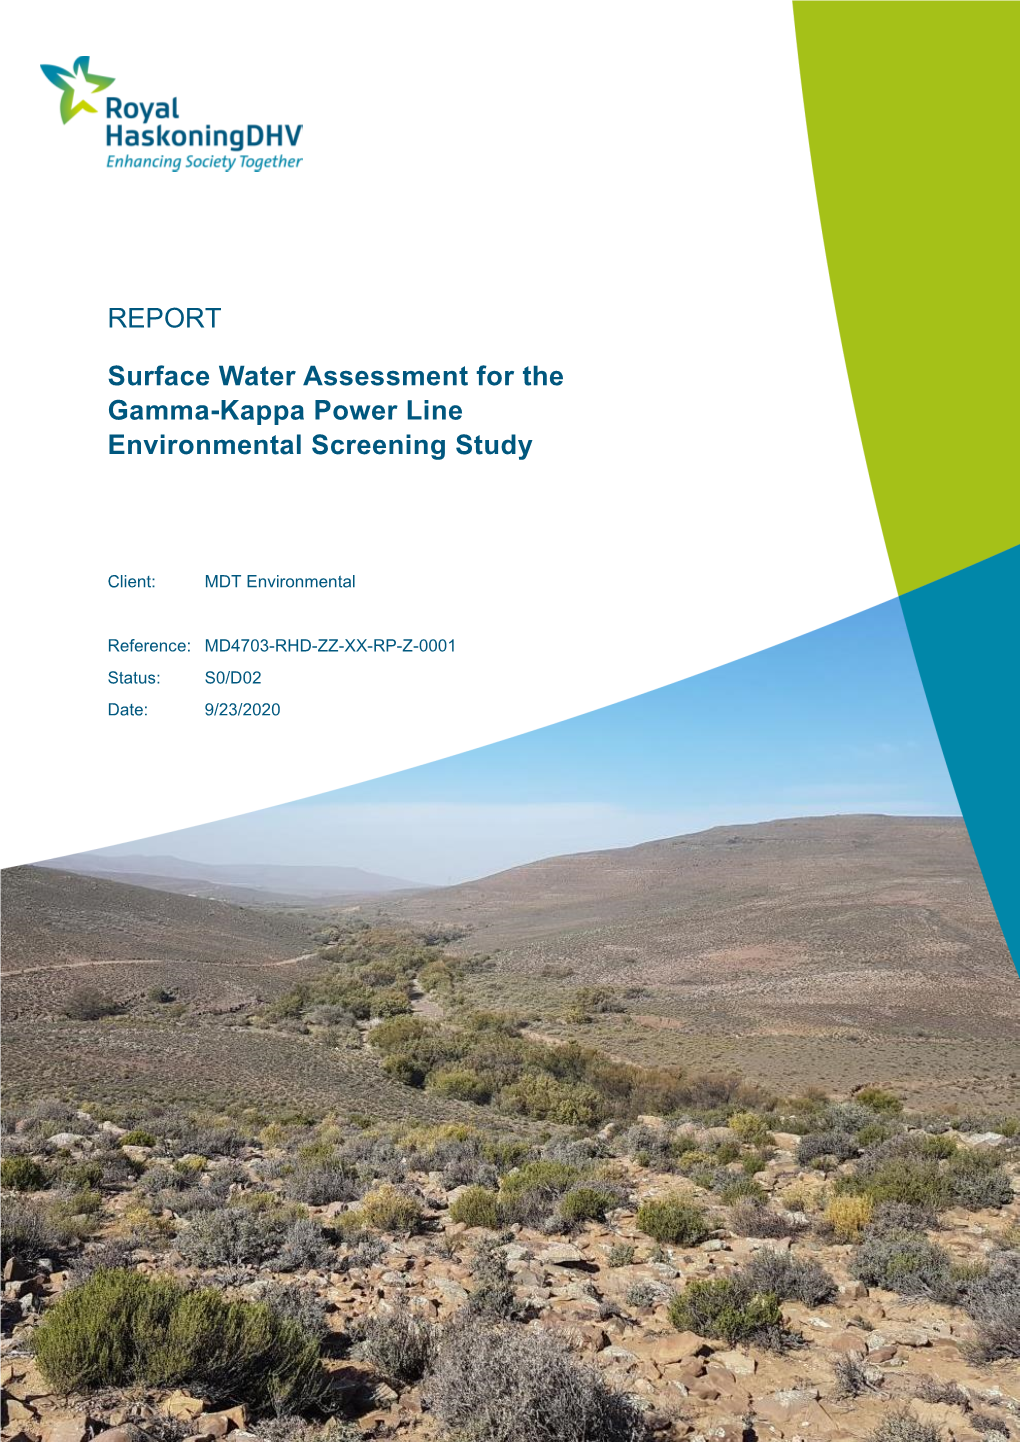 Surface Water Assessment for the Gamma-Kappa Power Line Environmental Screening Study